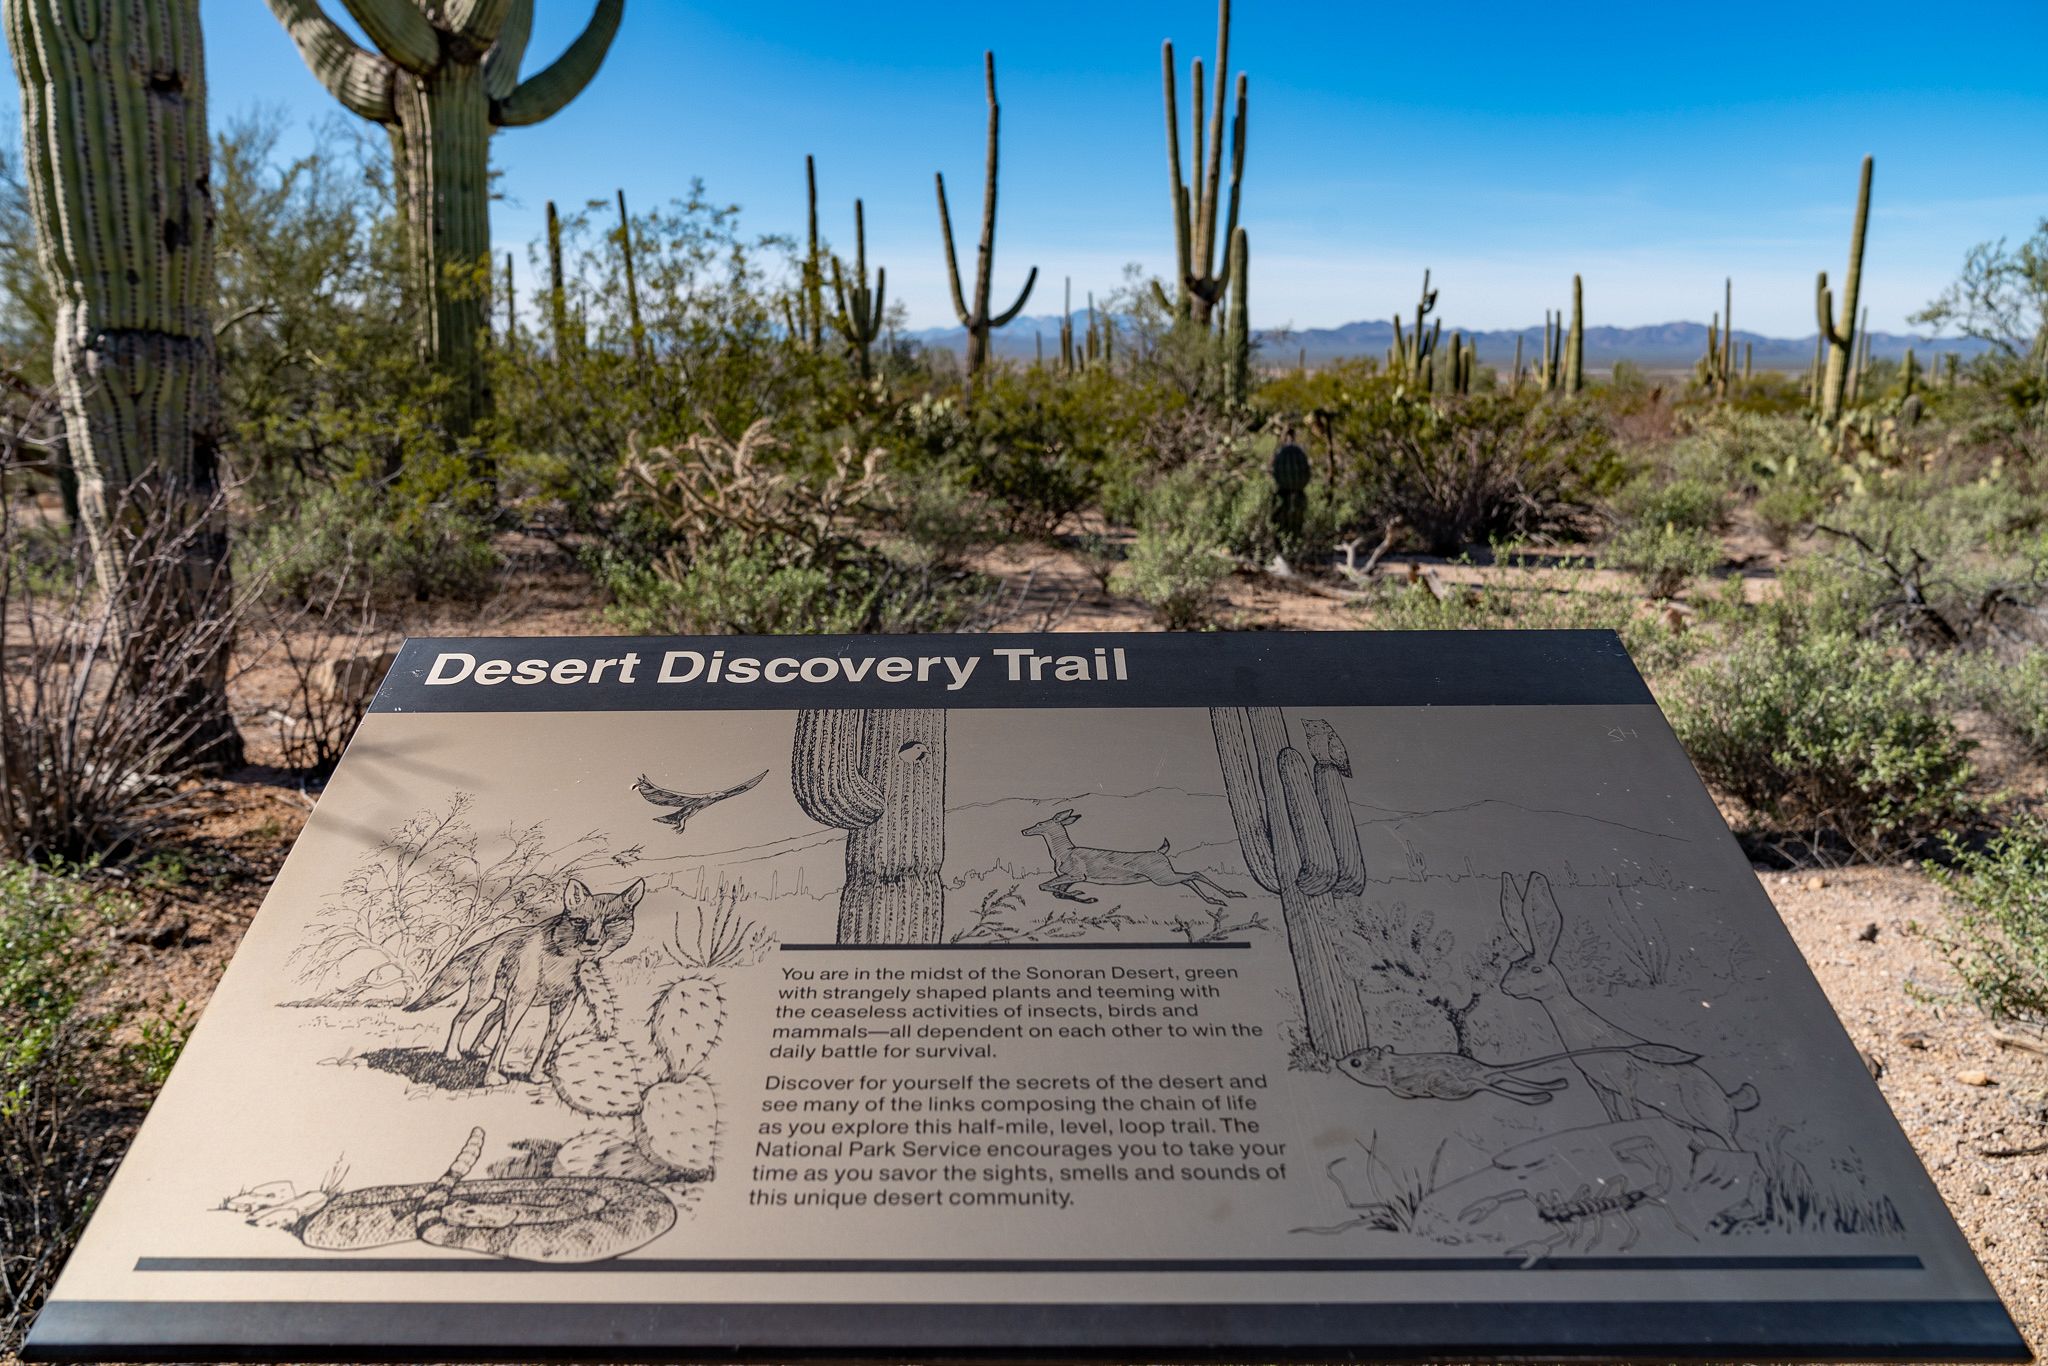 Desert Discovery Trail